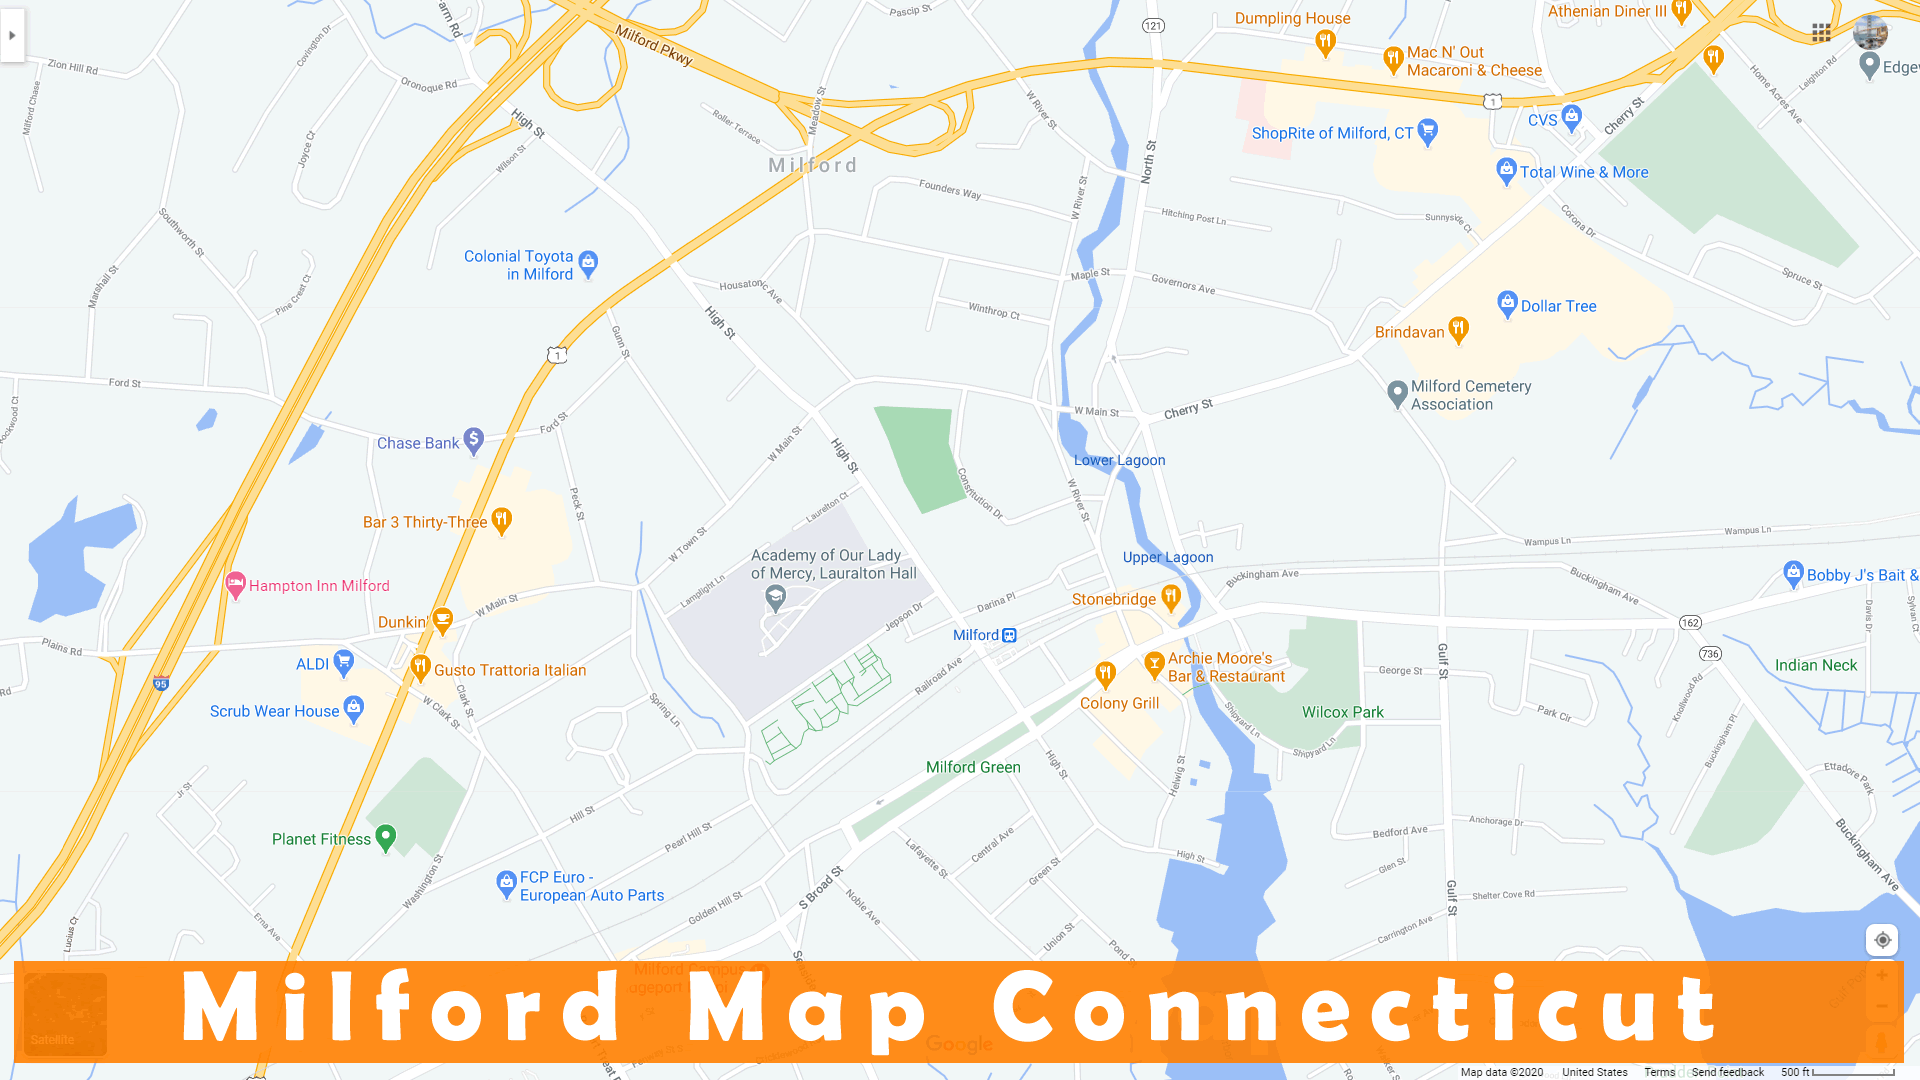 Milford map